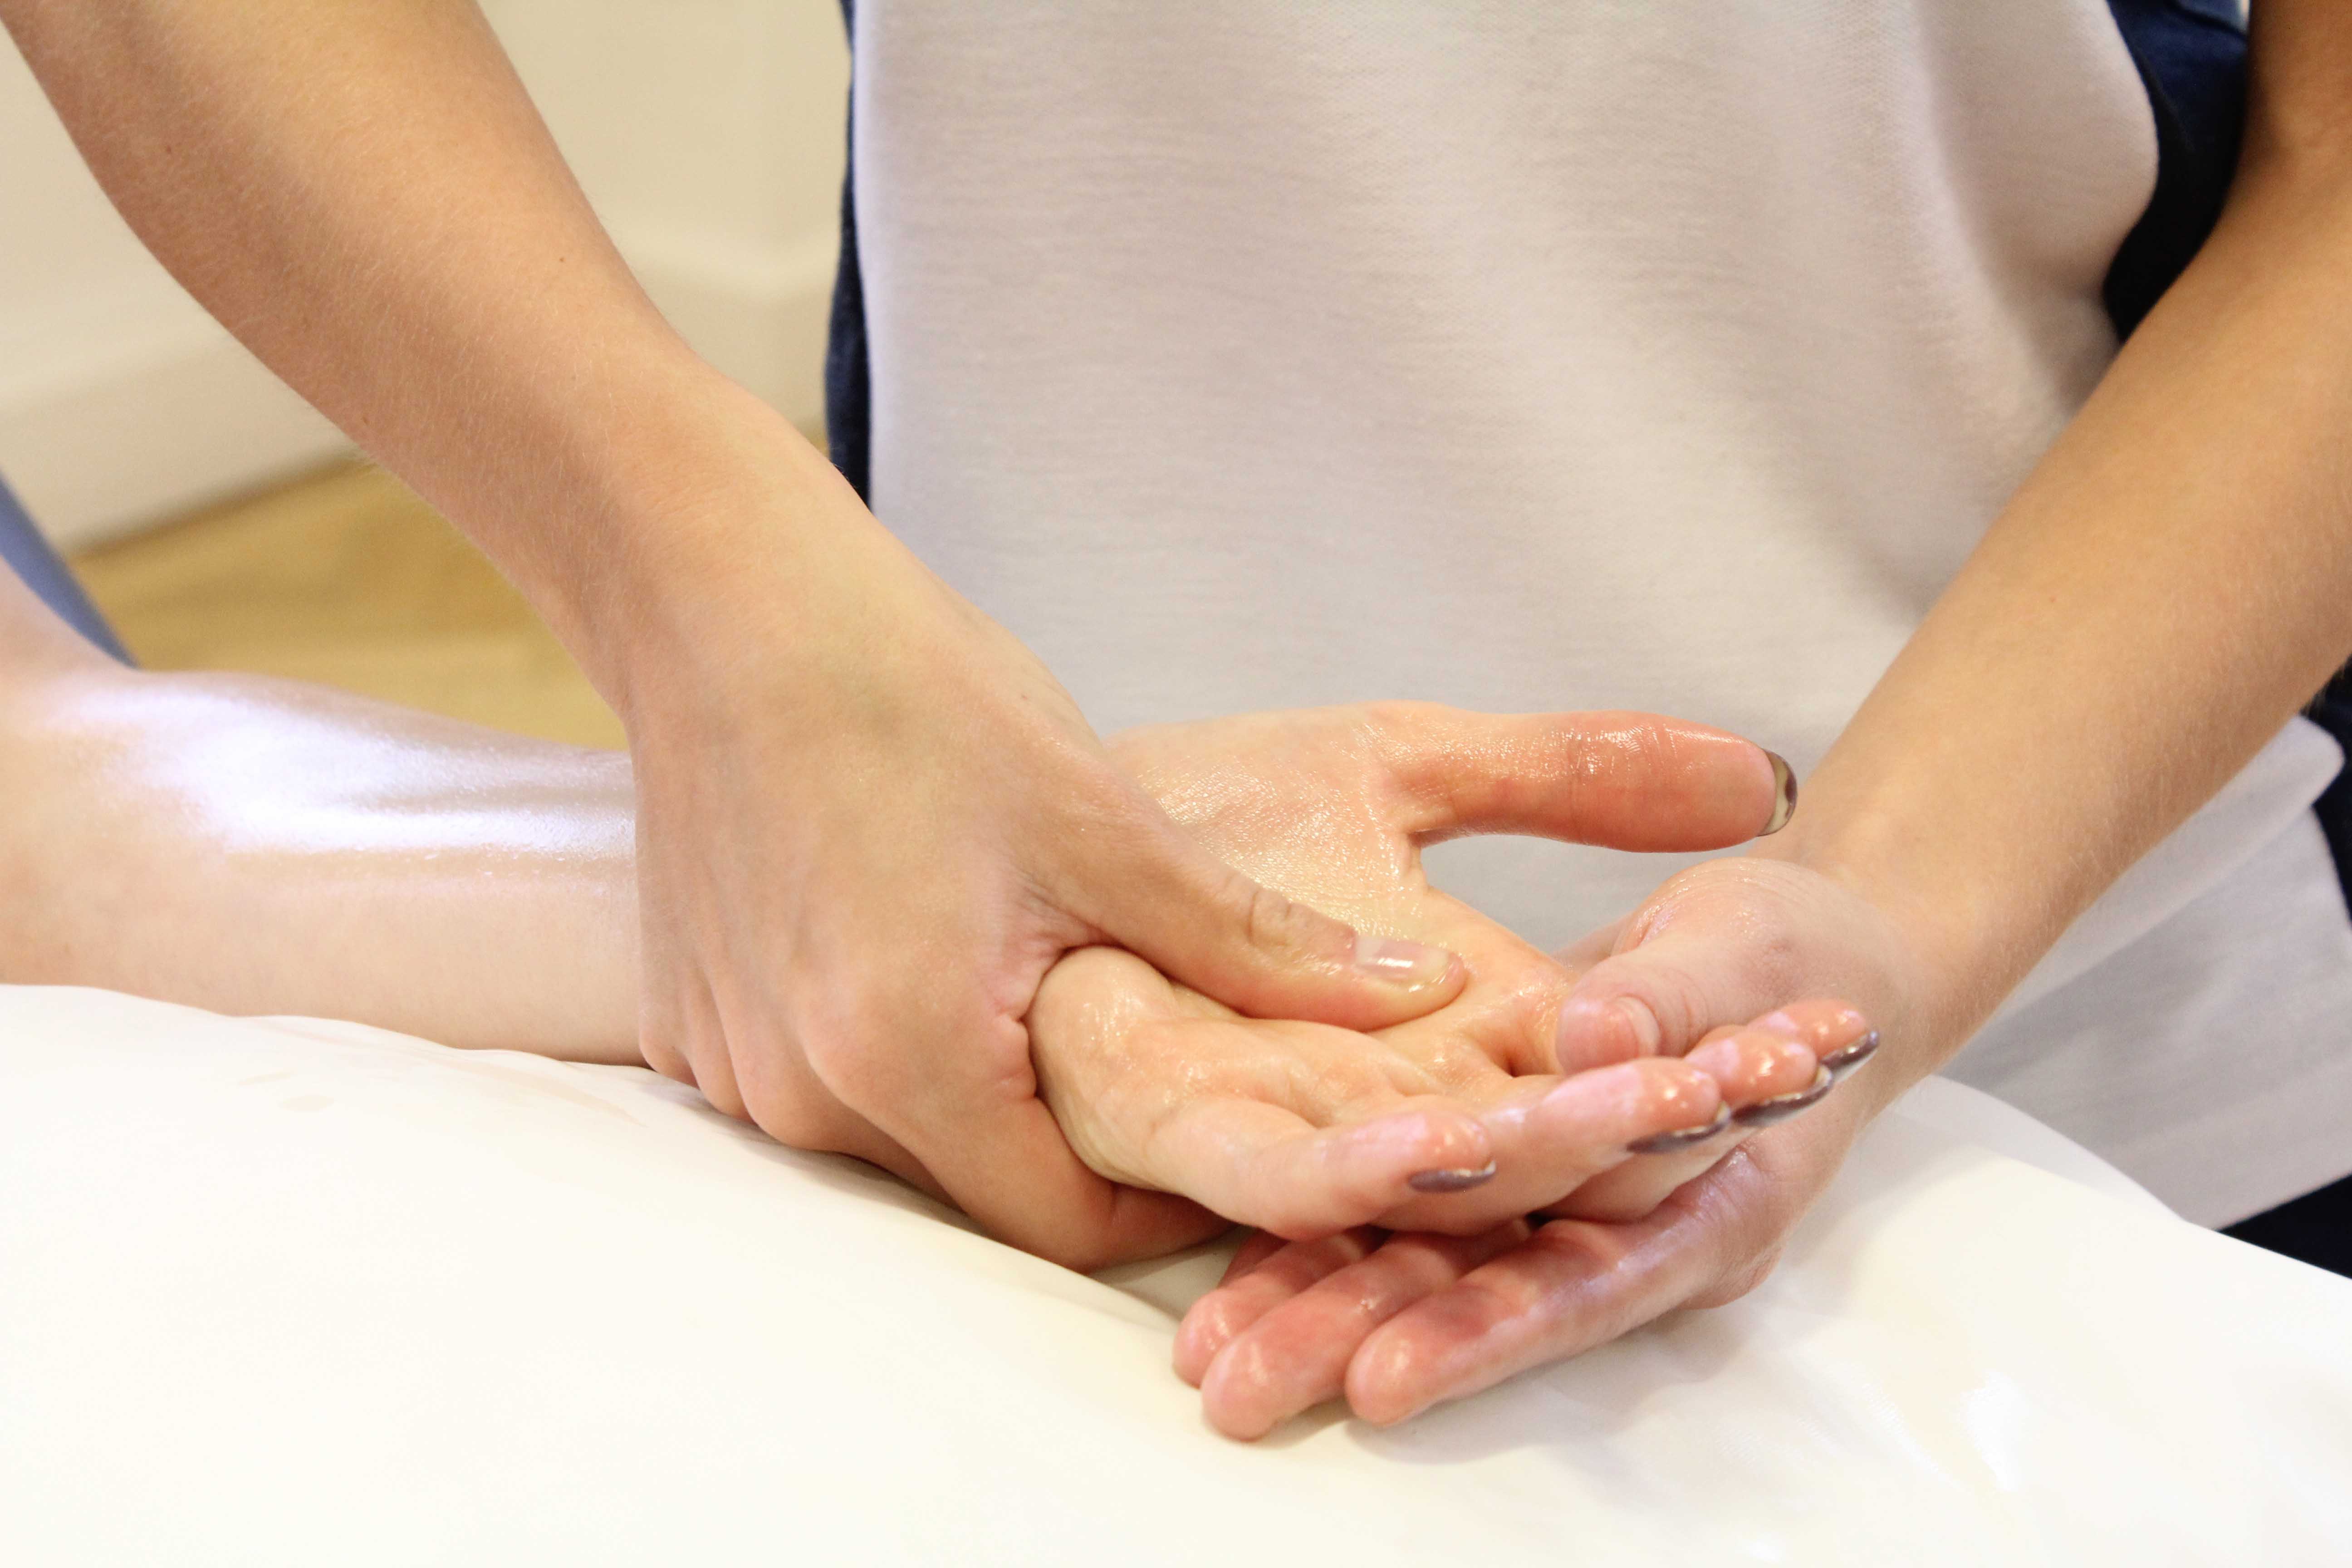 Soft tissue massage of the palma fascia to relieve pain and stiffness